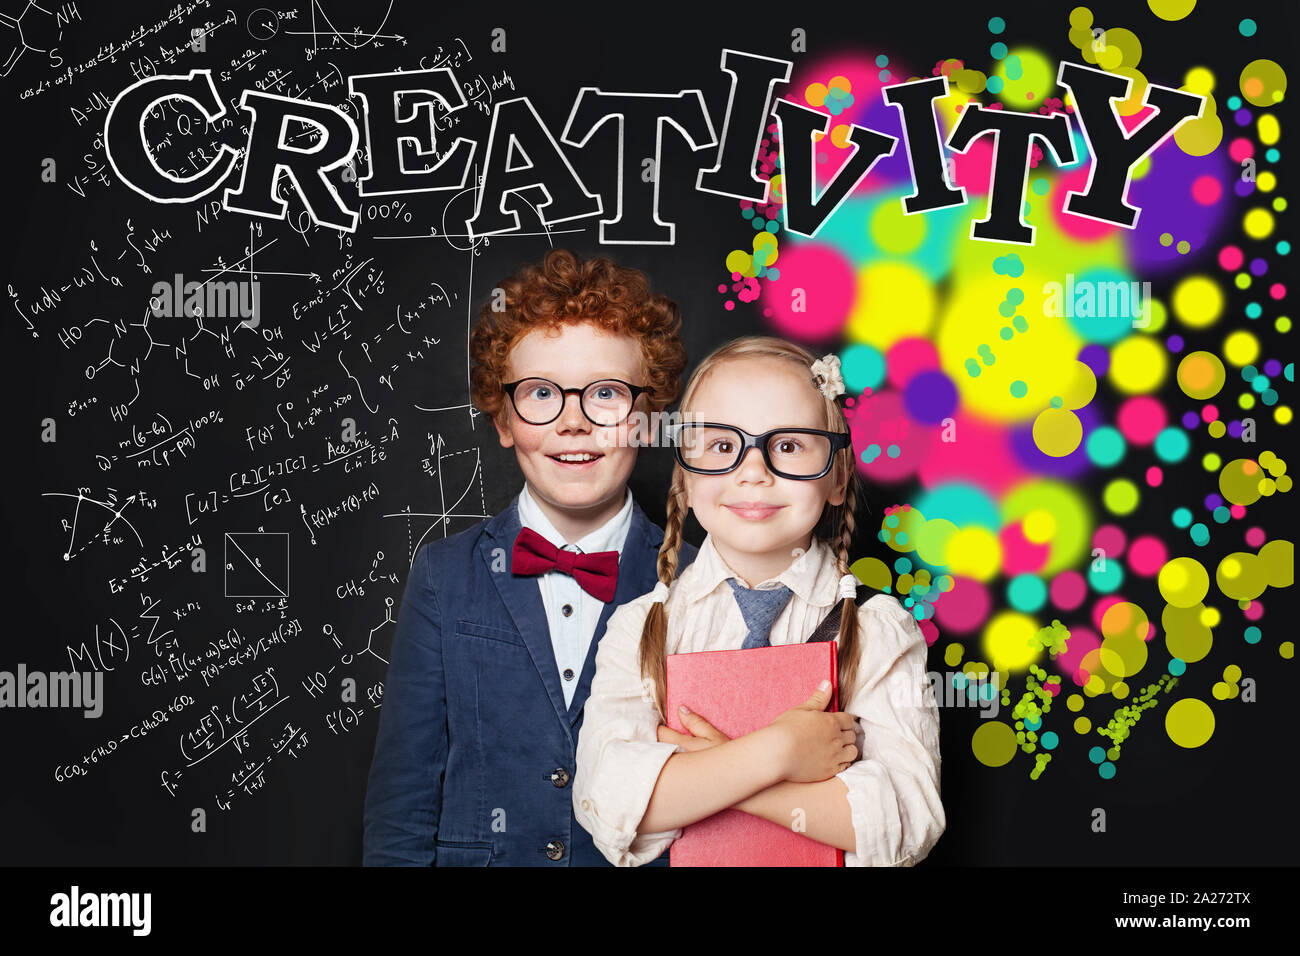 Creativity education and left hemispheres of the brain concept. Cute smart girl and boy in glasses portrait Stock Photo